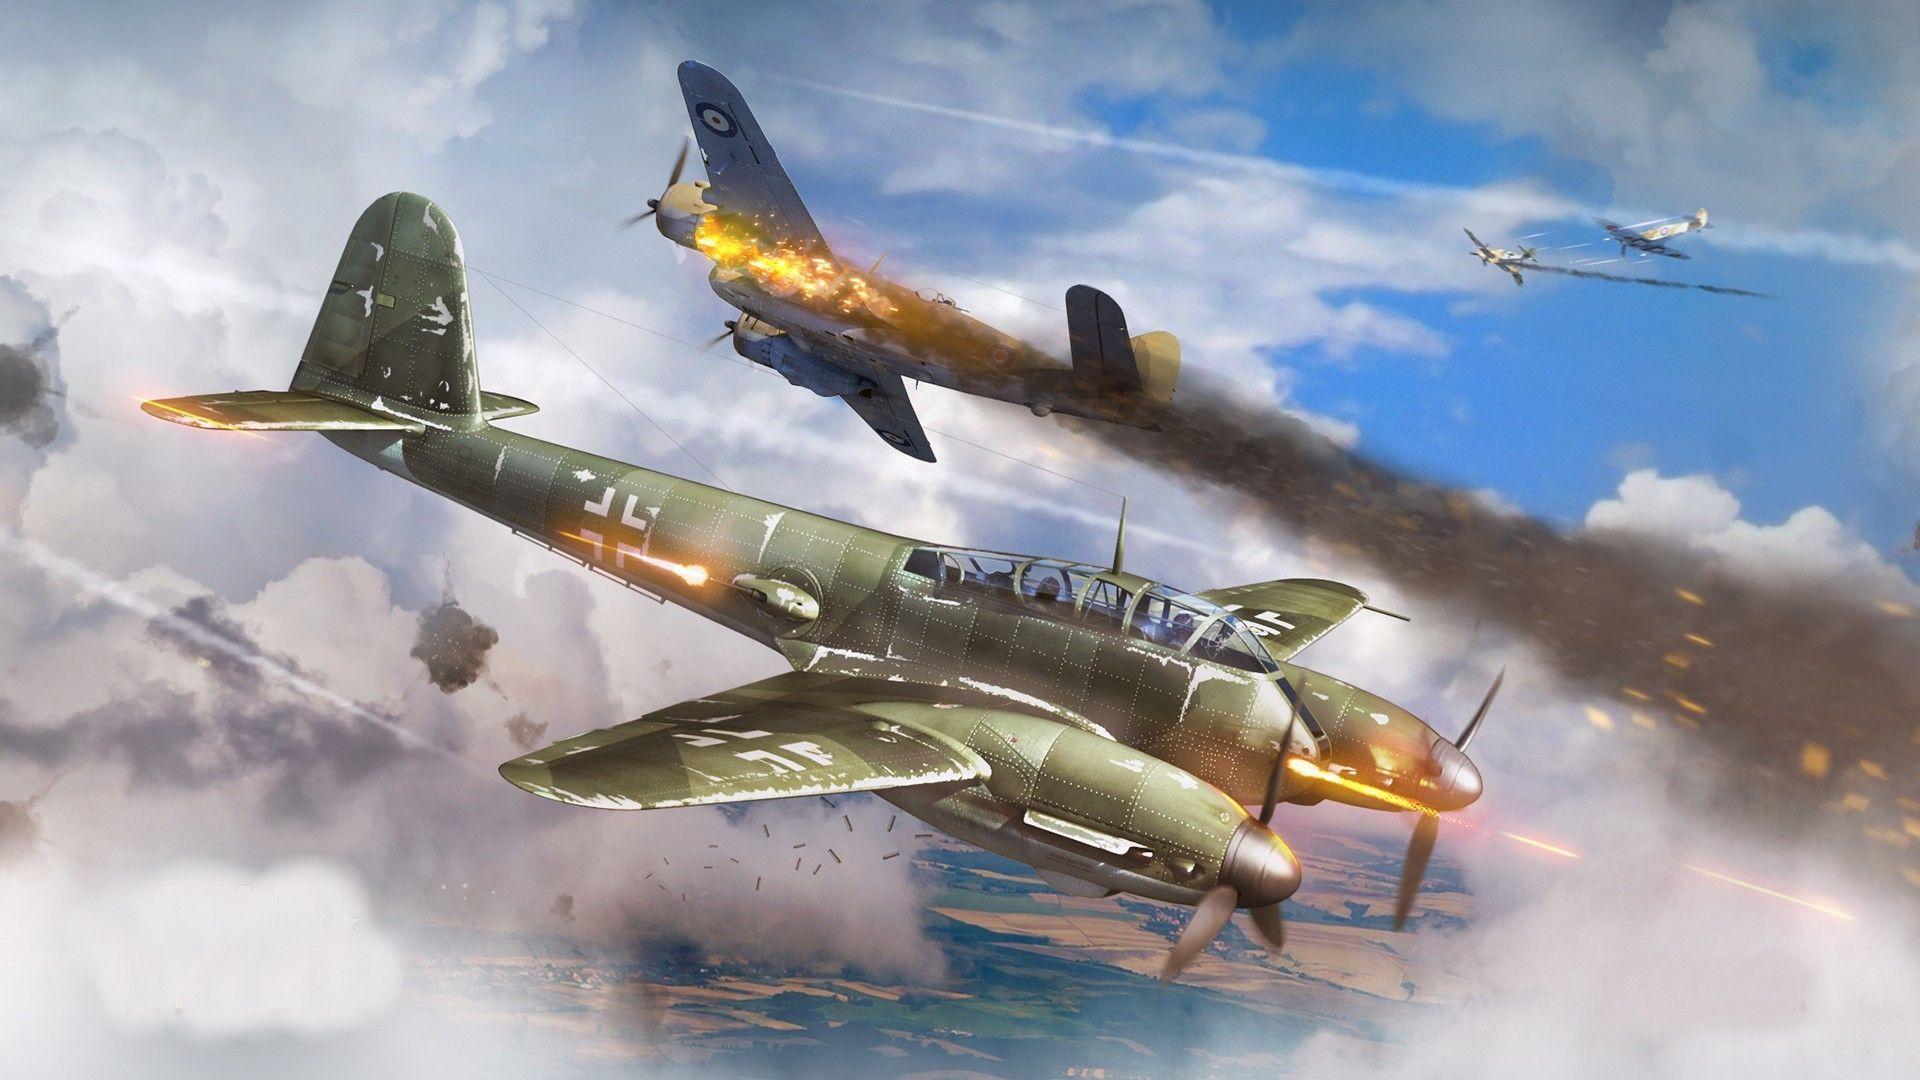 Wwii Plane Wallpapers Top Free Wwii Plane Backgrounds Wallpaperaccess